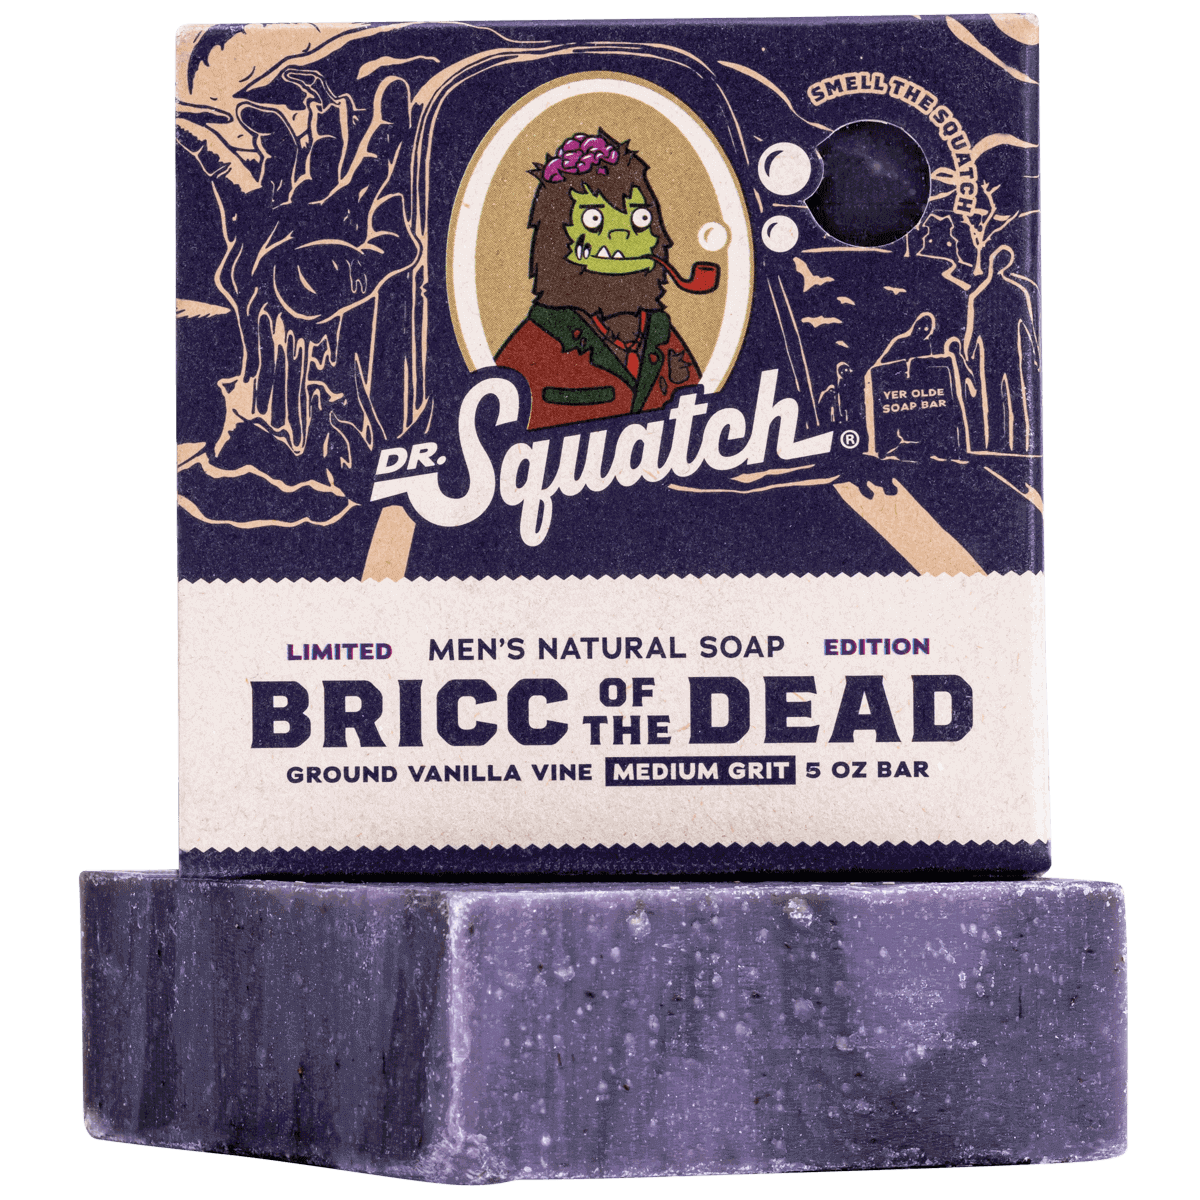 Who is behind the mask? - Dr. Squatch Soap Co